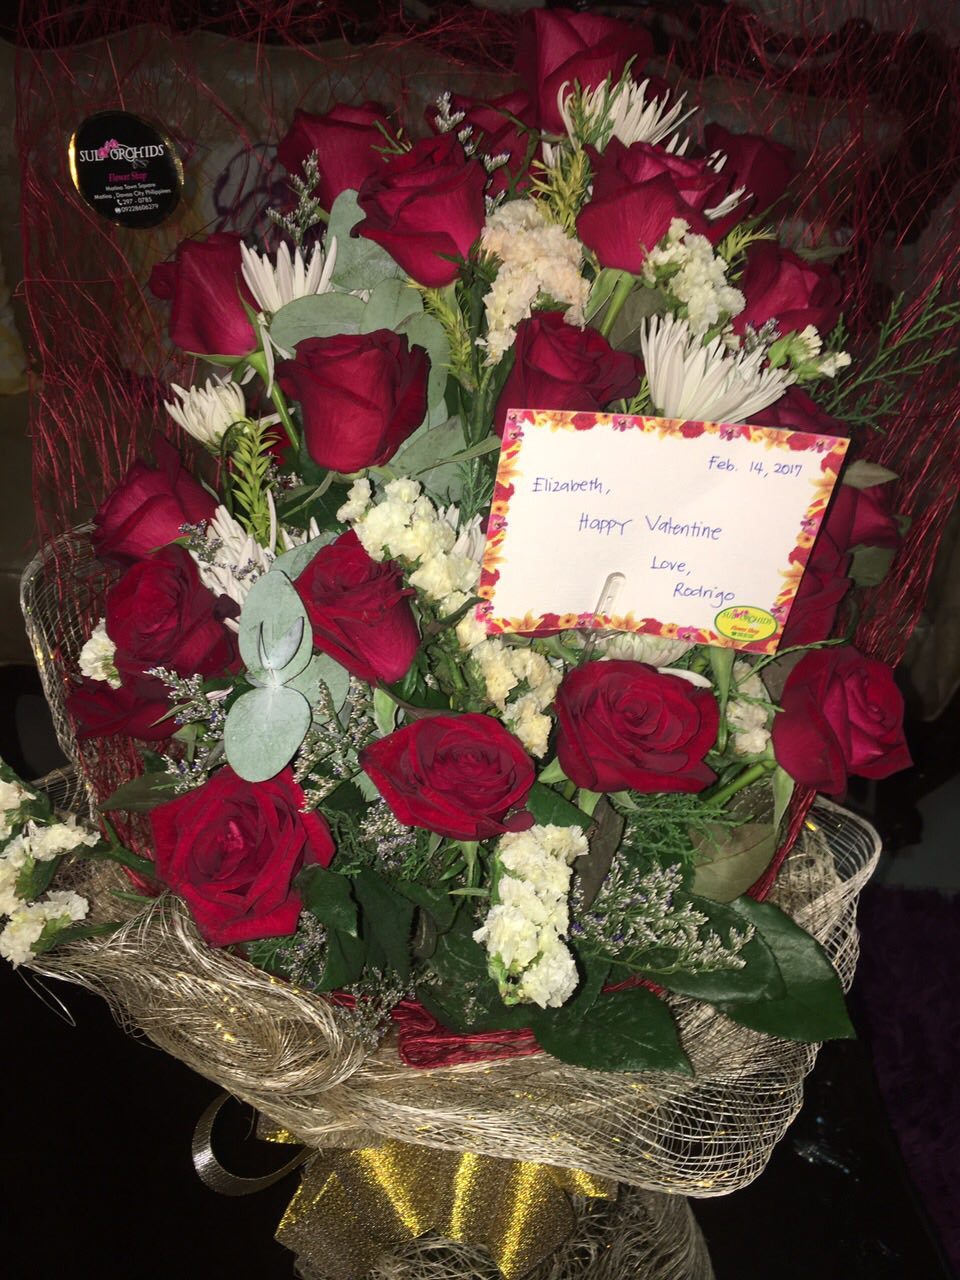 ROSES ARE RED. The President sends a bouquet of flowers to Elizabeth Zimmerman. Photo from Mayor Sara Duterte  